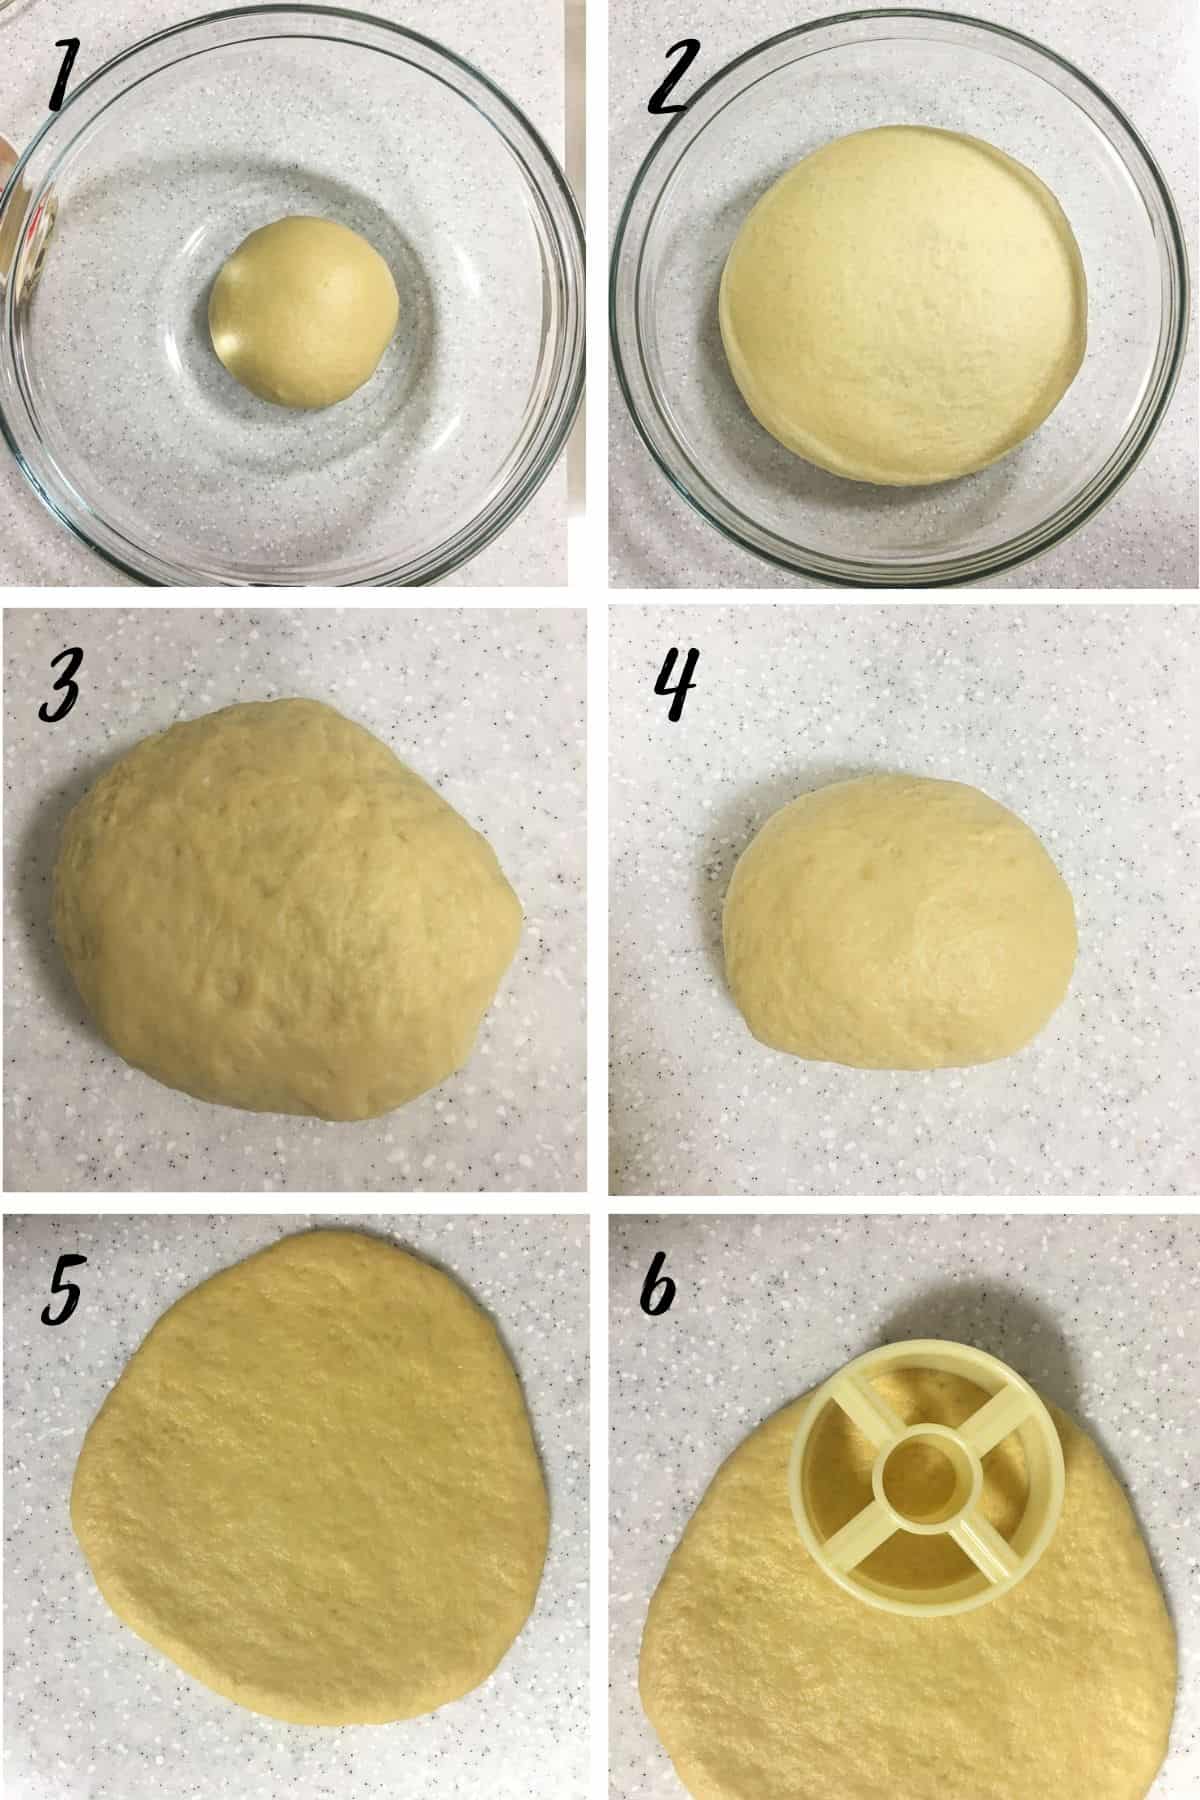 A poster of 6 images showing how to roll and cut doughnuts from dough.